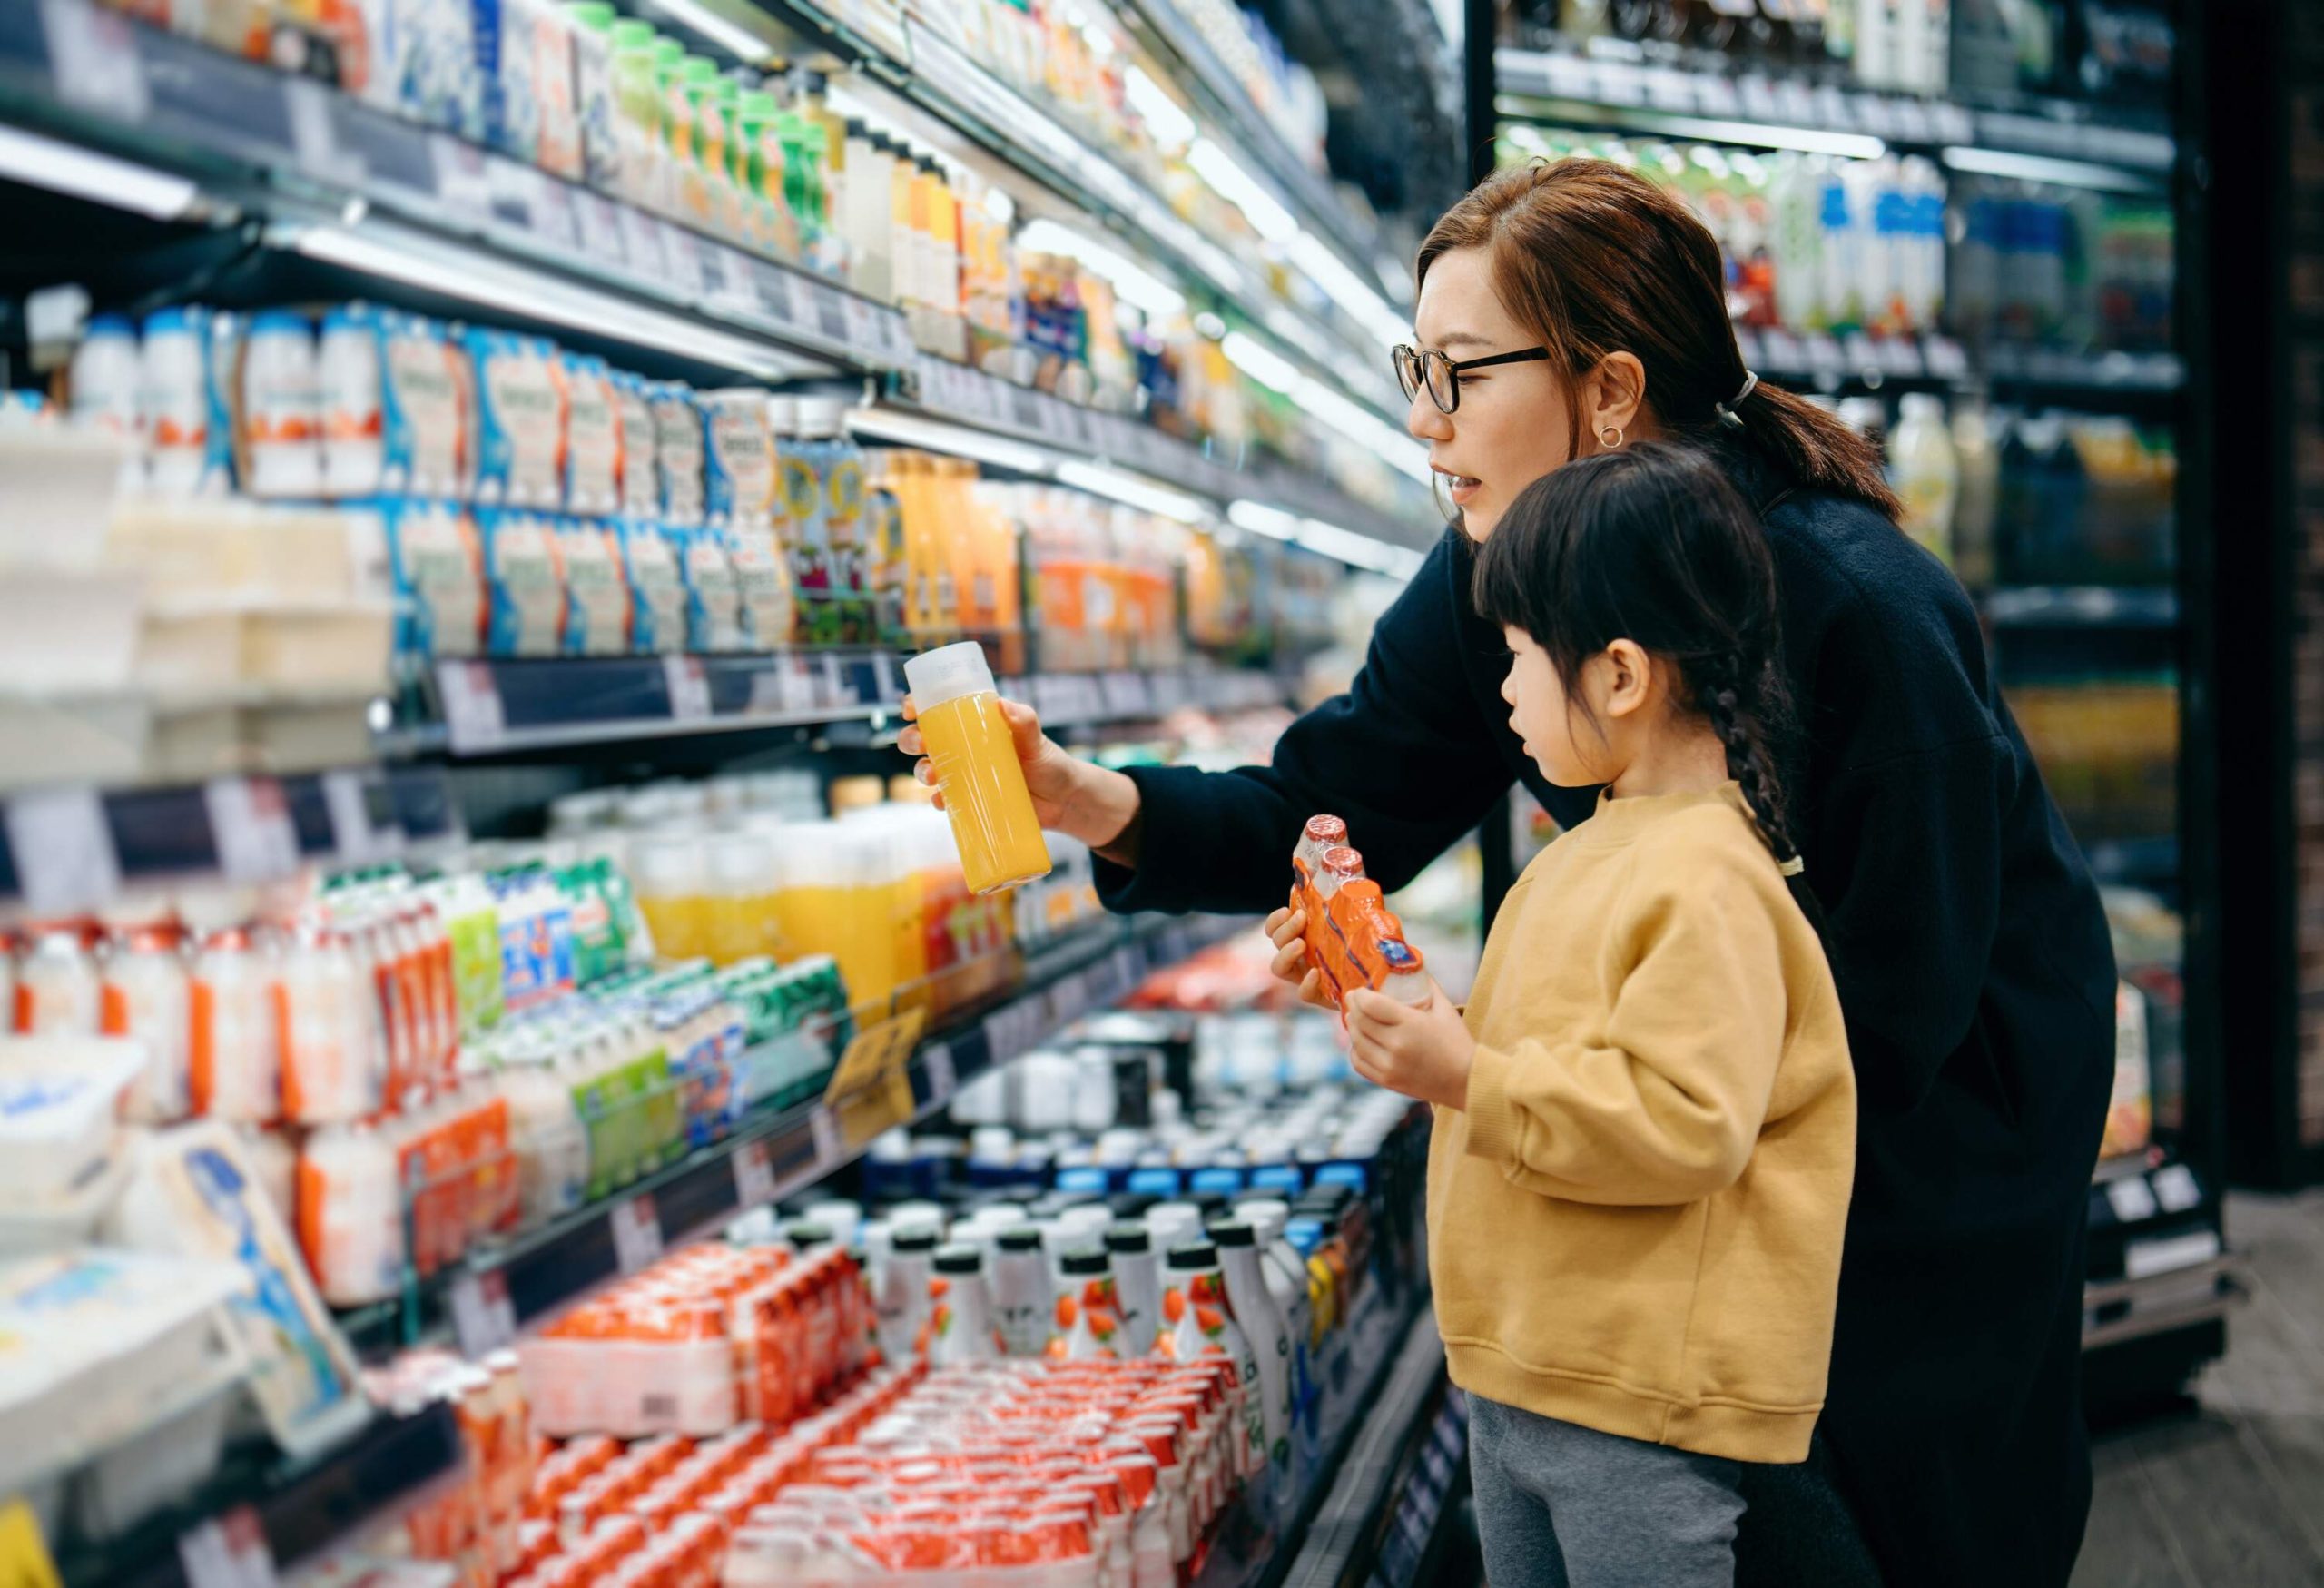 Young Asian mother and her little daughter grocery shopping in supermarket. they are choosing fresh fruit juice together along the beverage aisle. Routine grocery shopping. Healthy eating lifestyle.